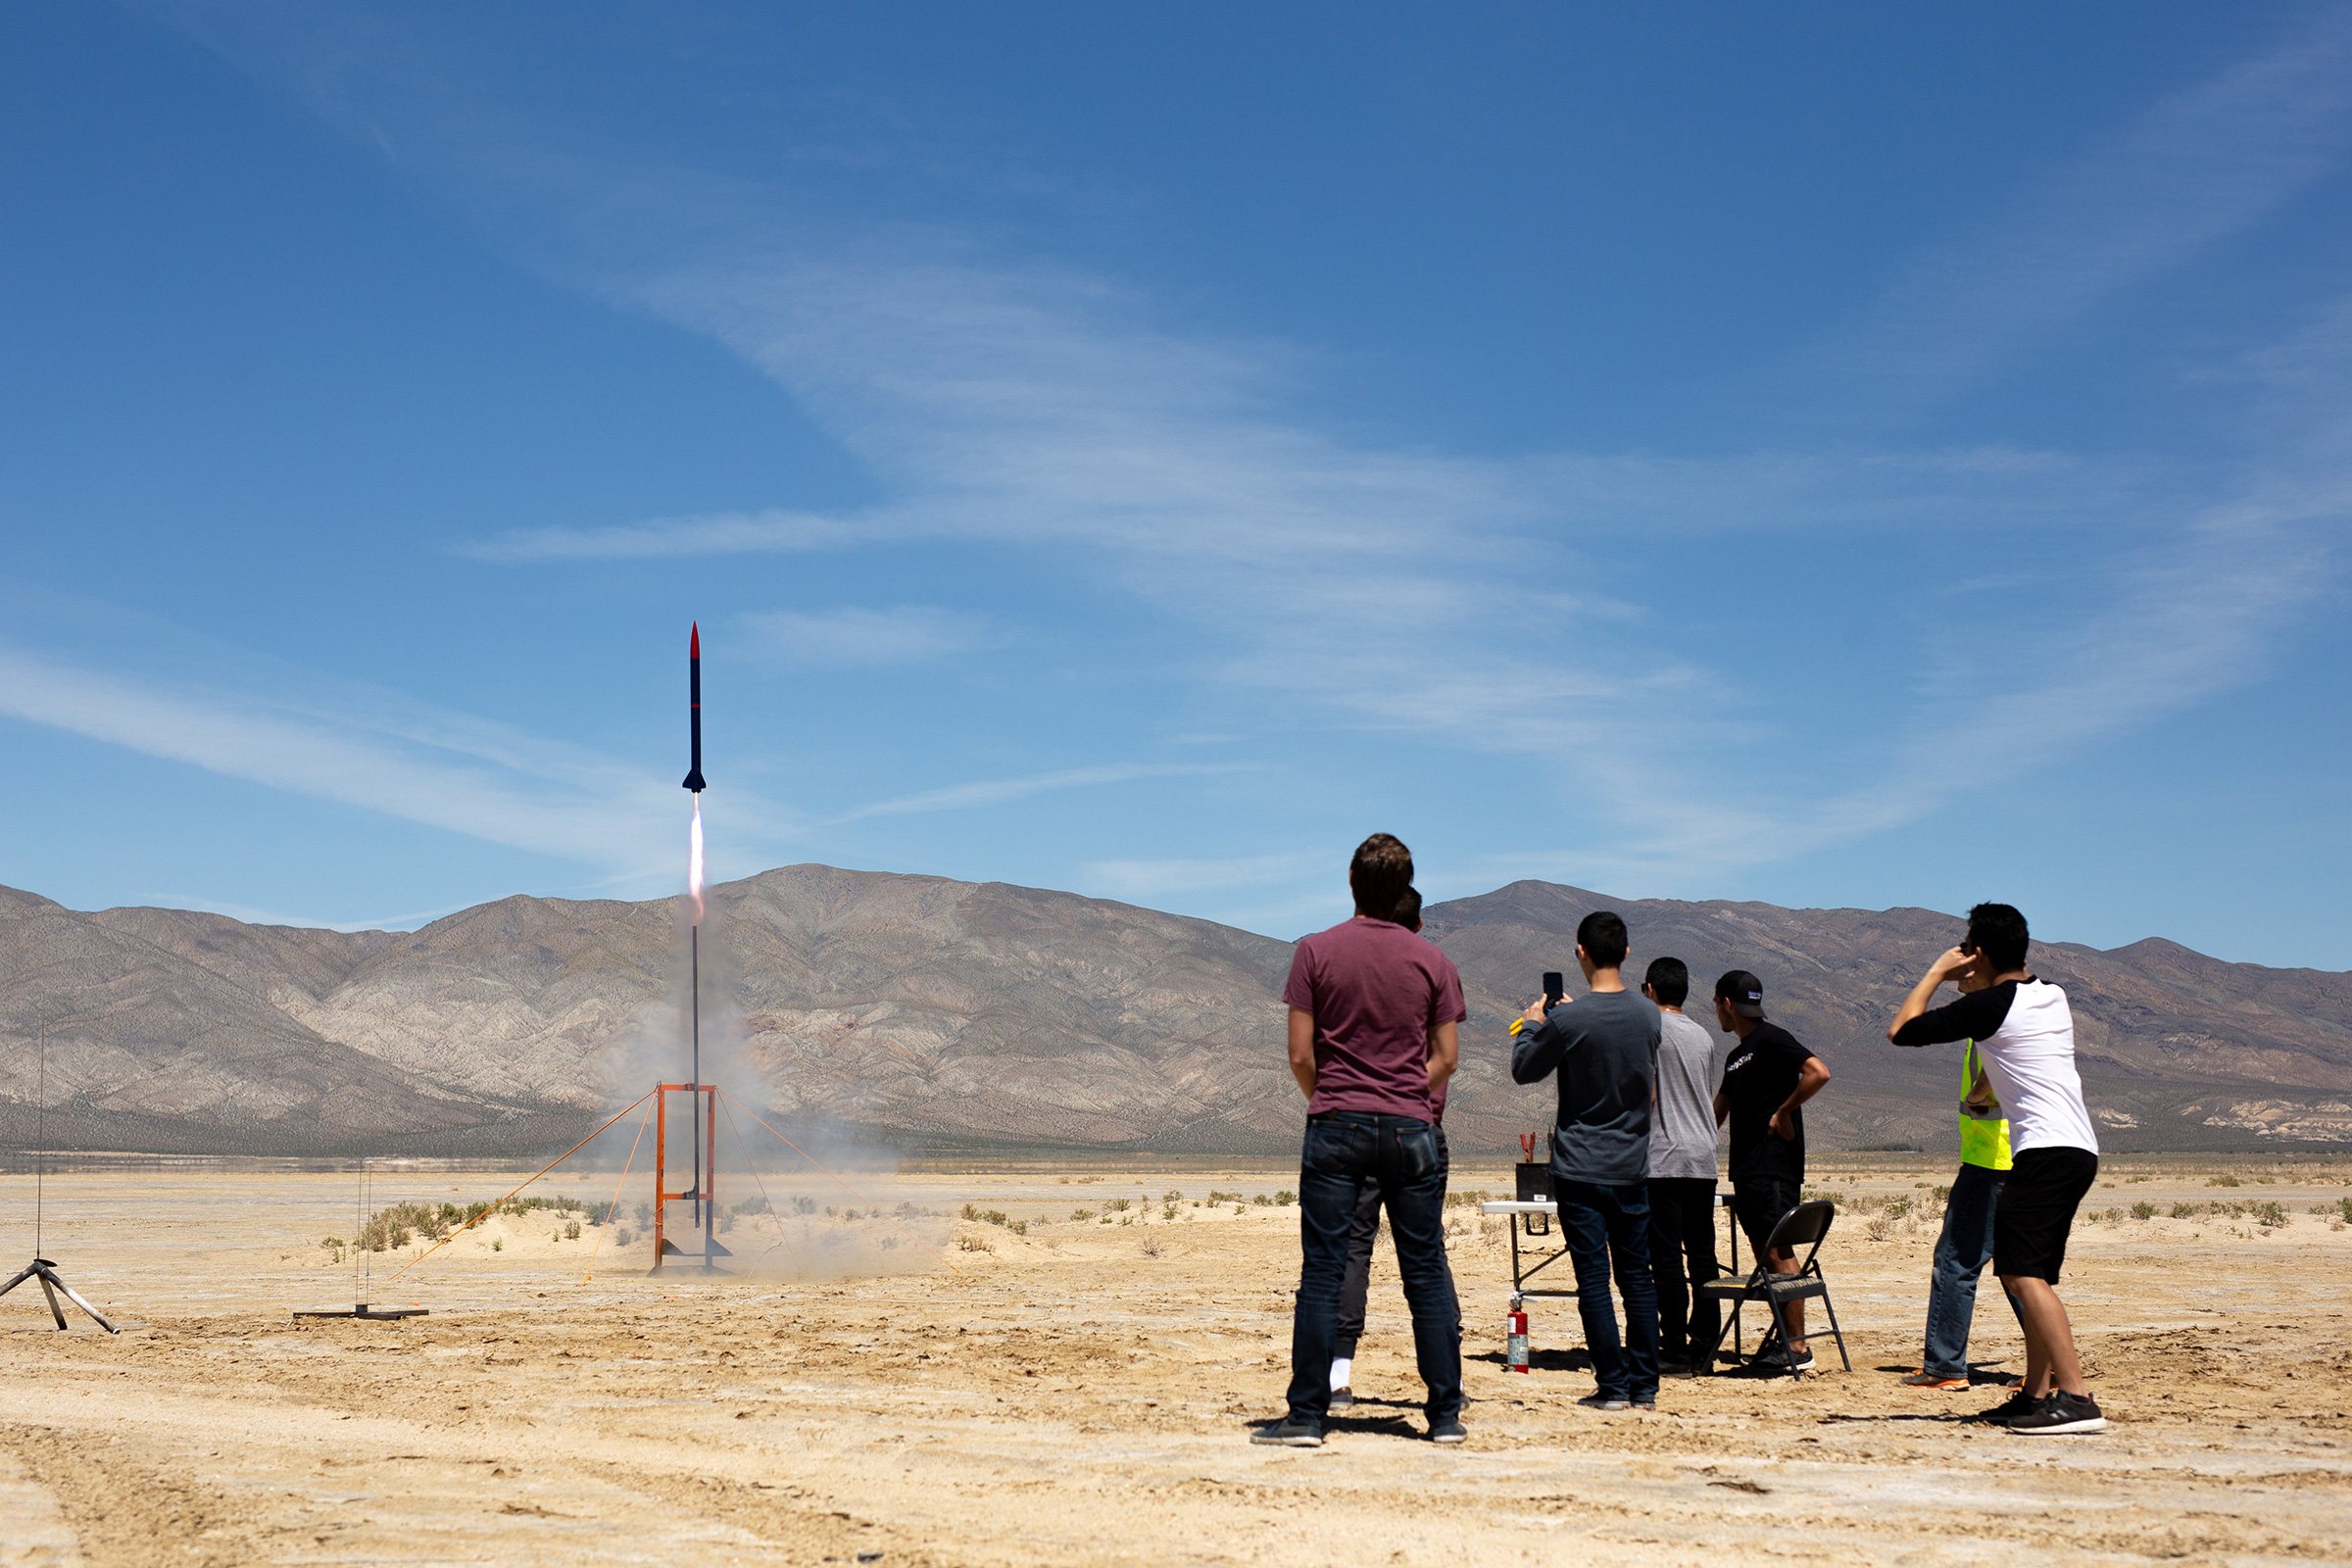 Students launching a rocket in the desert.